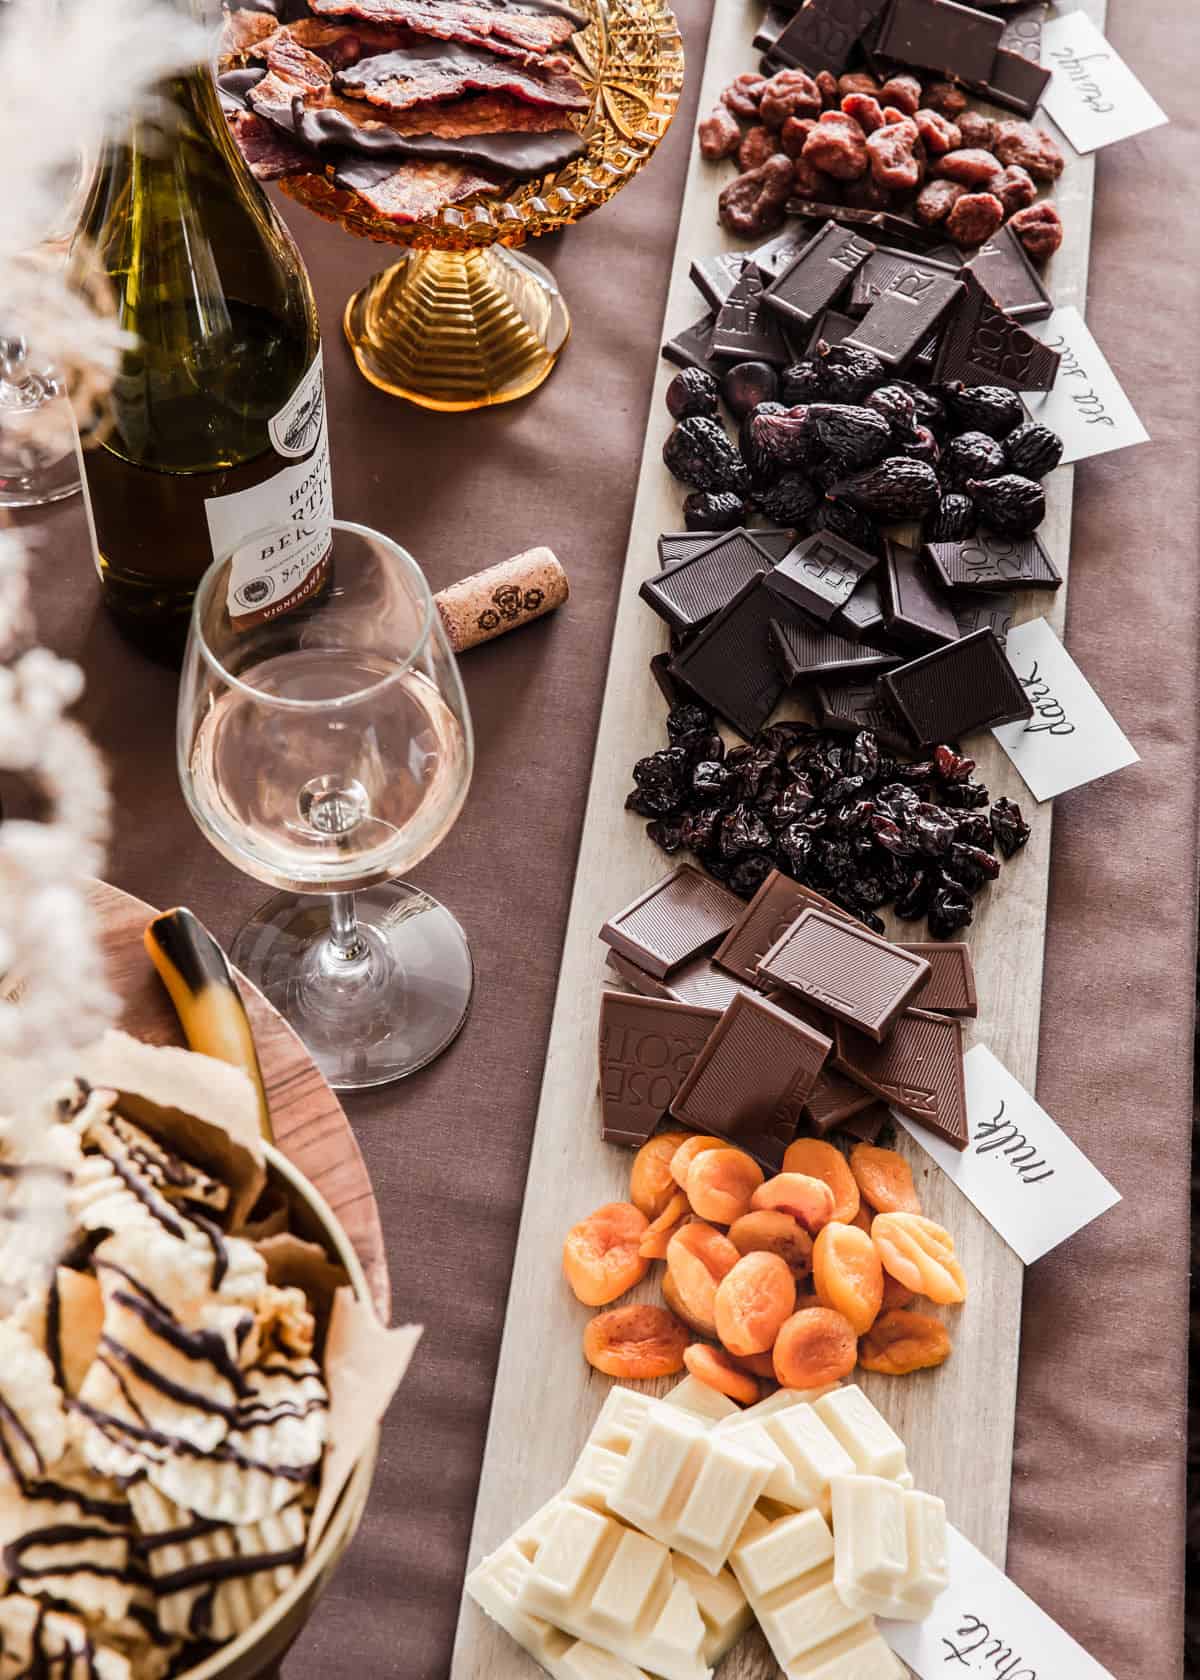 long wood plank filled with chocolate squares and dried fruit on brown tablecloth.